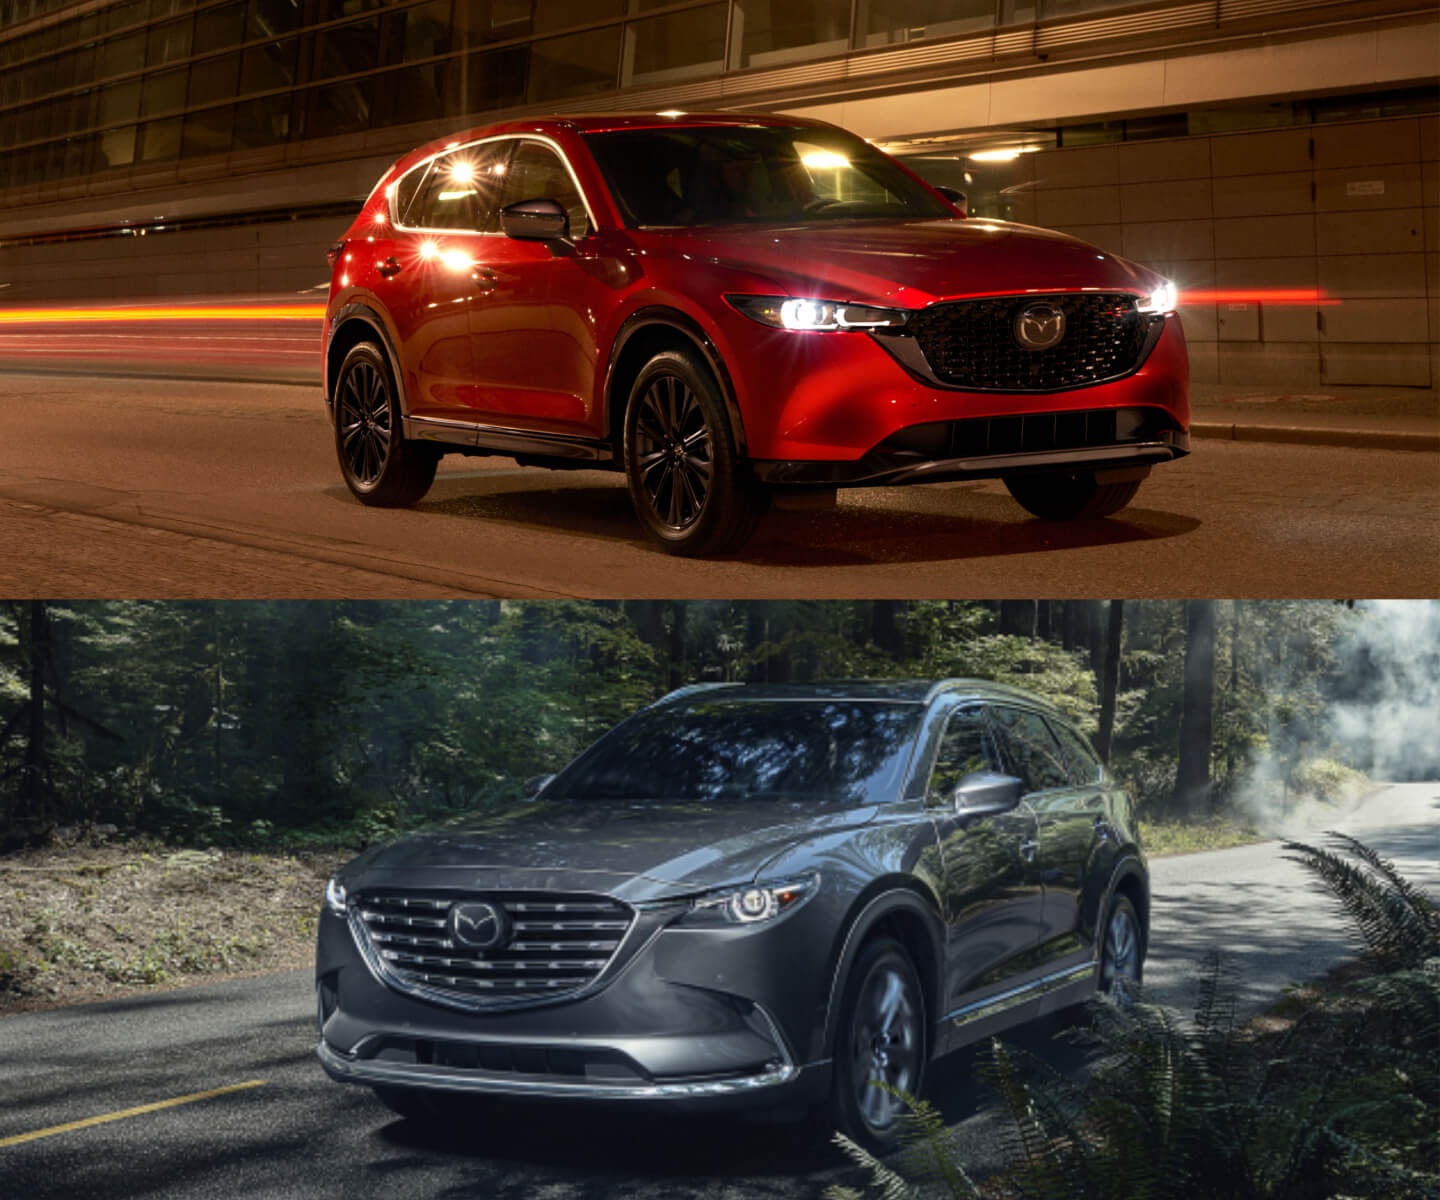 The 2023 Mazda CX-5 seen on top of the 2023 Mazda CX-9